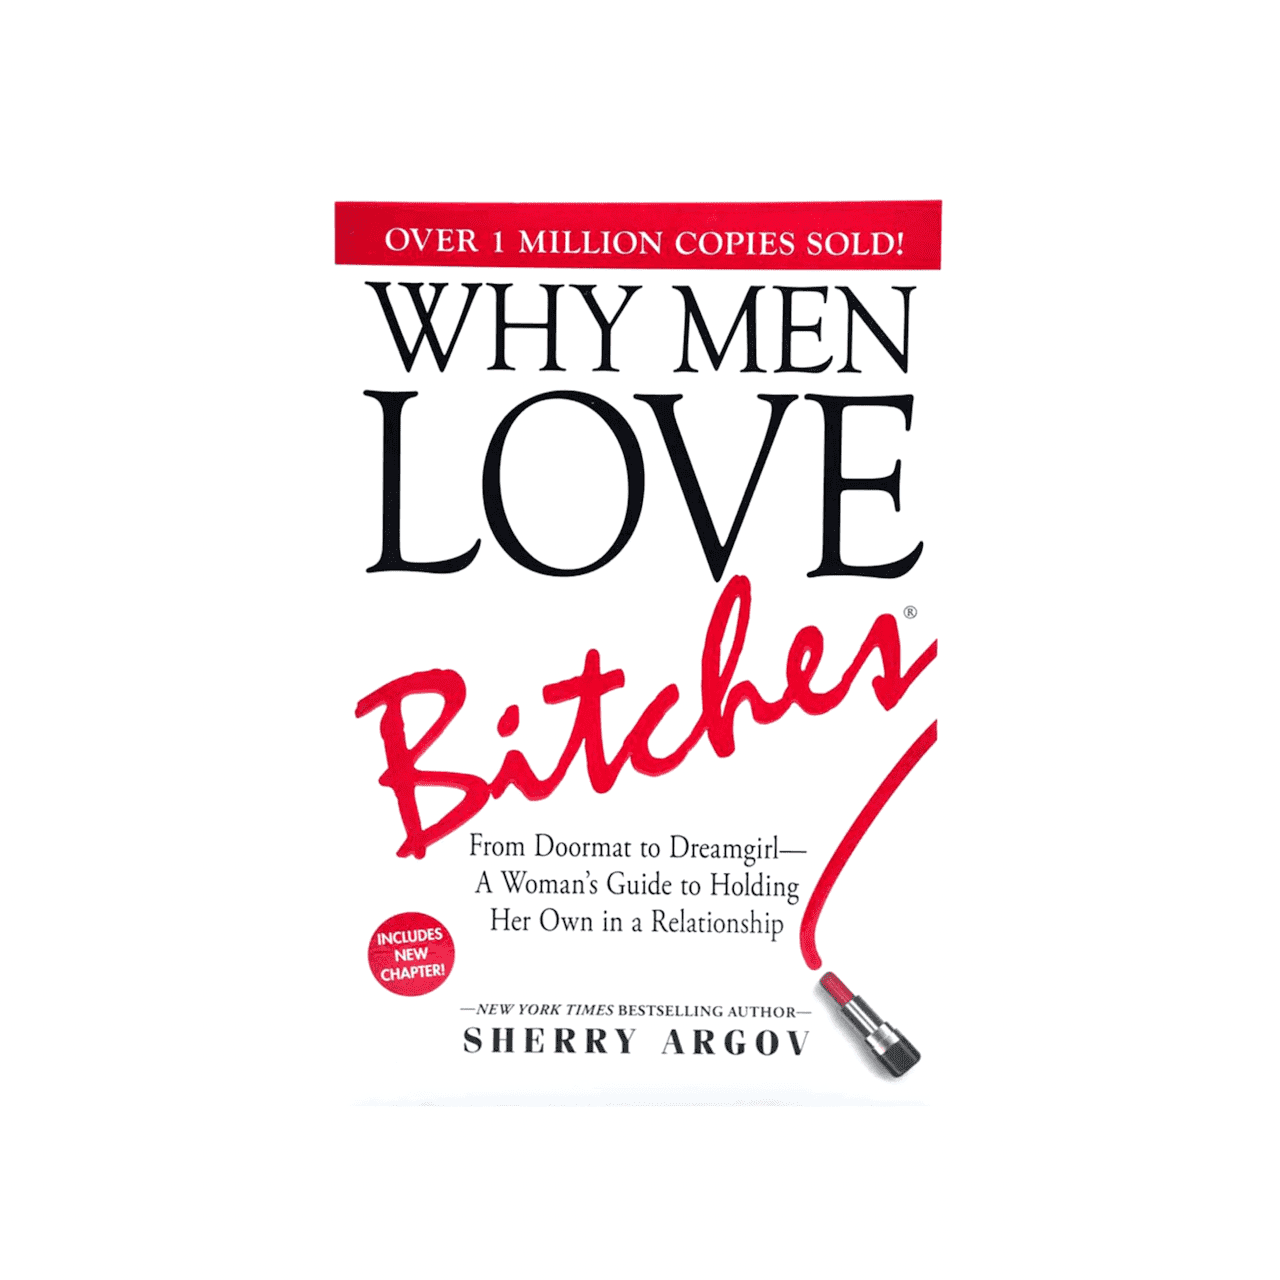 Why Men Love Bitches From Doormat To Dreamgirl | Sherry Argov